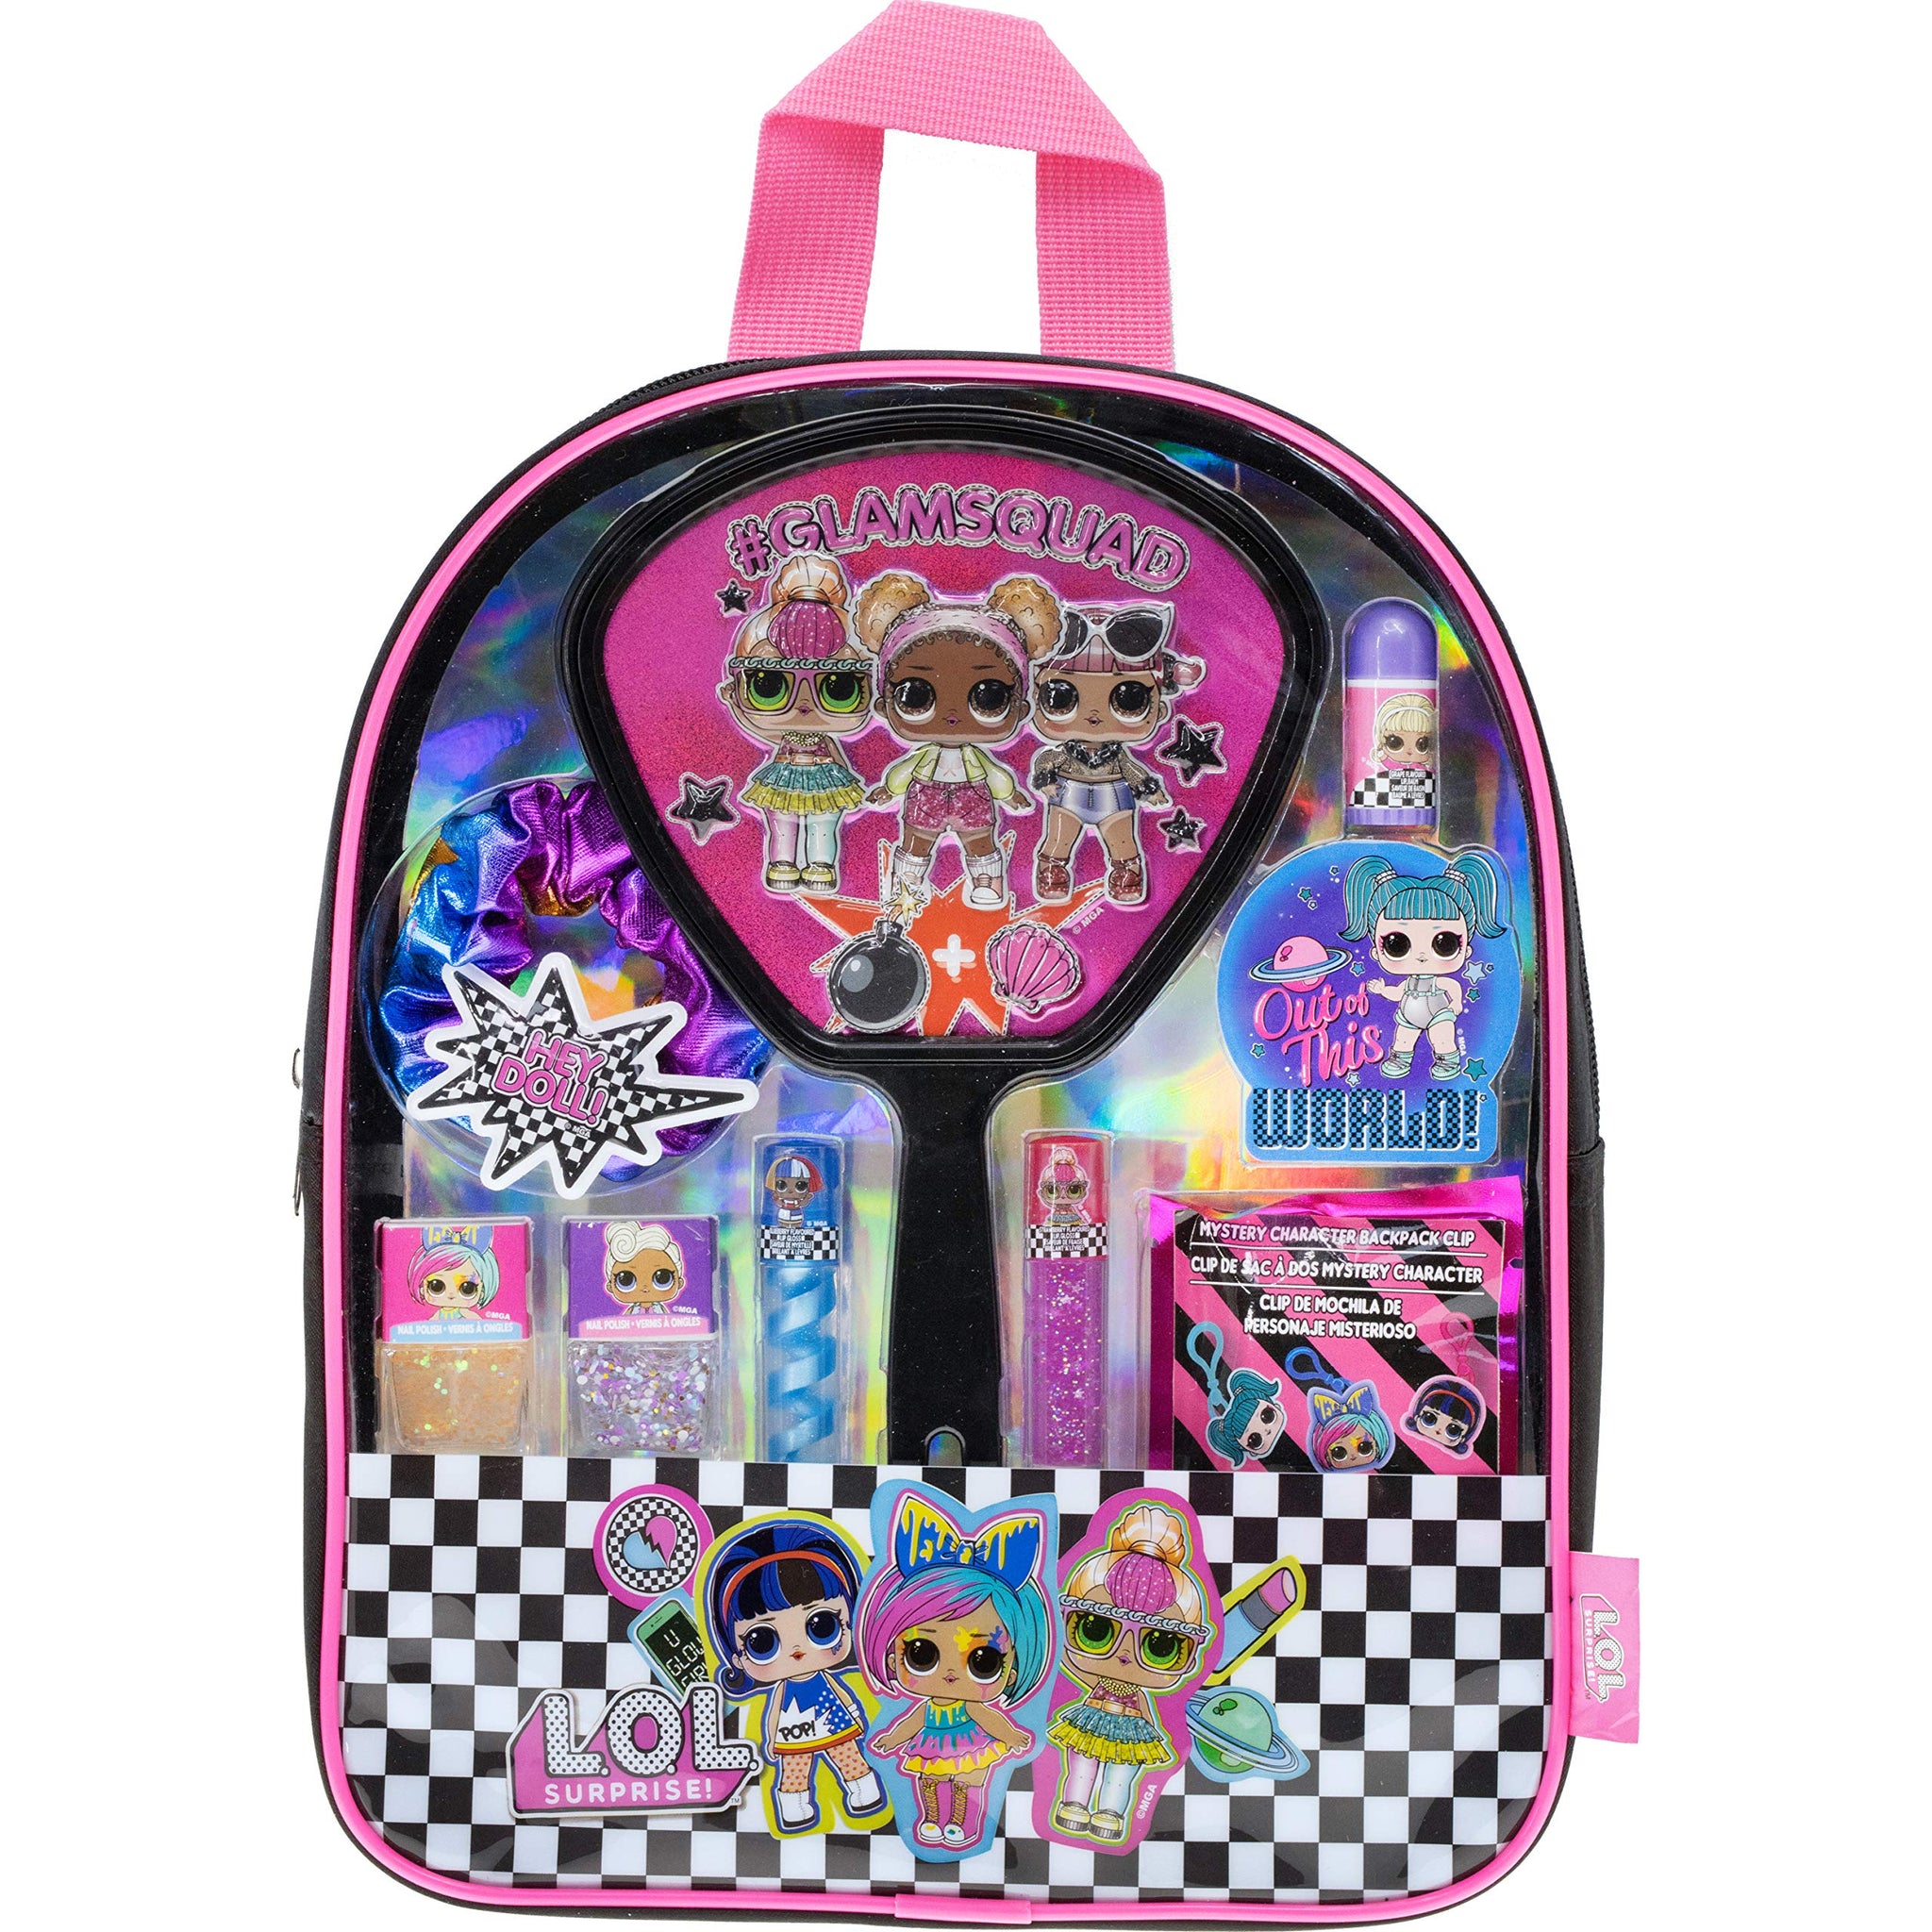 Surprise! Townley Girl backpack Cosmetic makeup Set 10 Pieces,